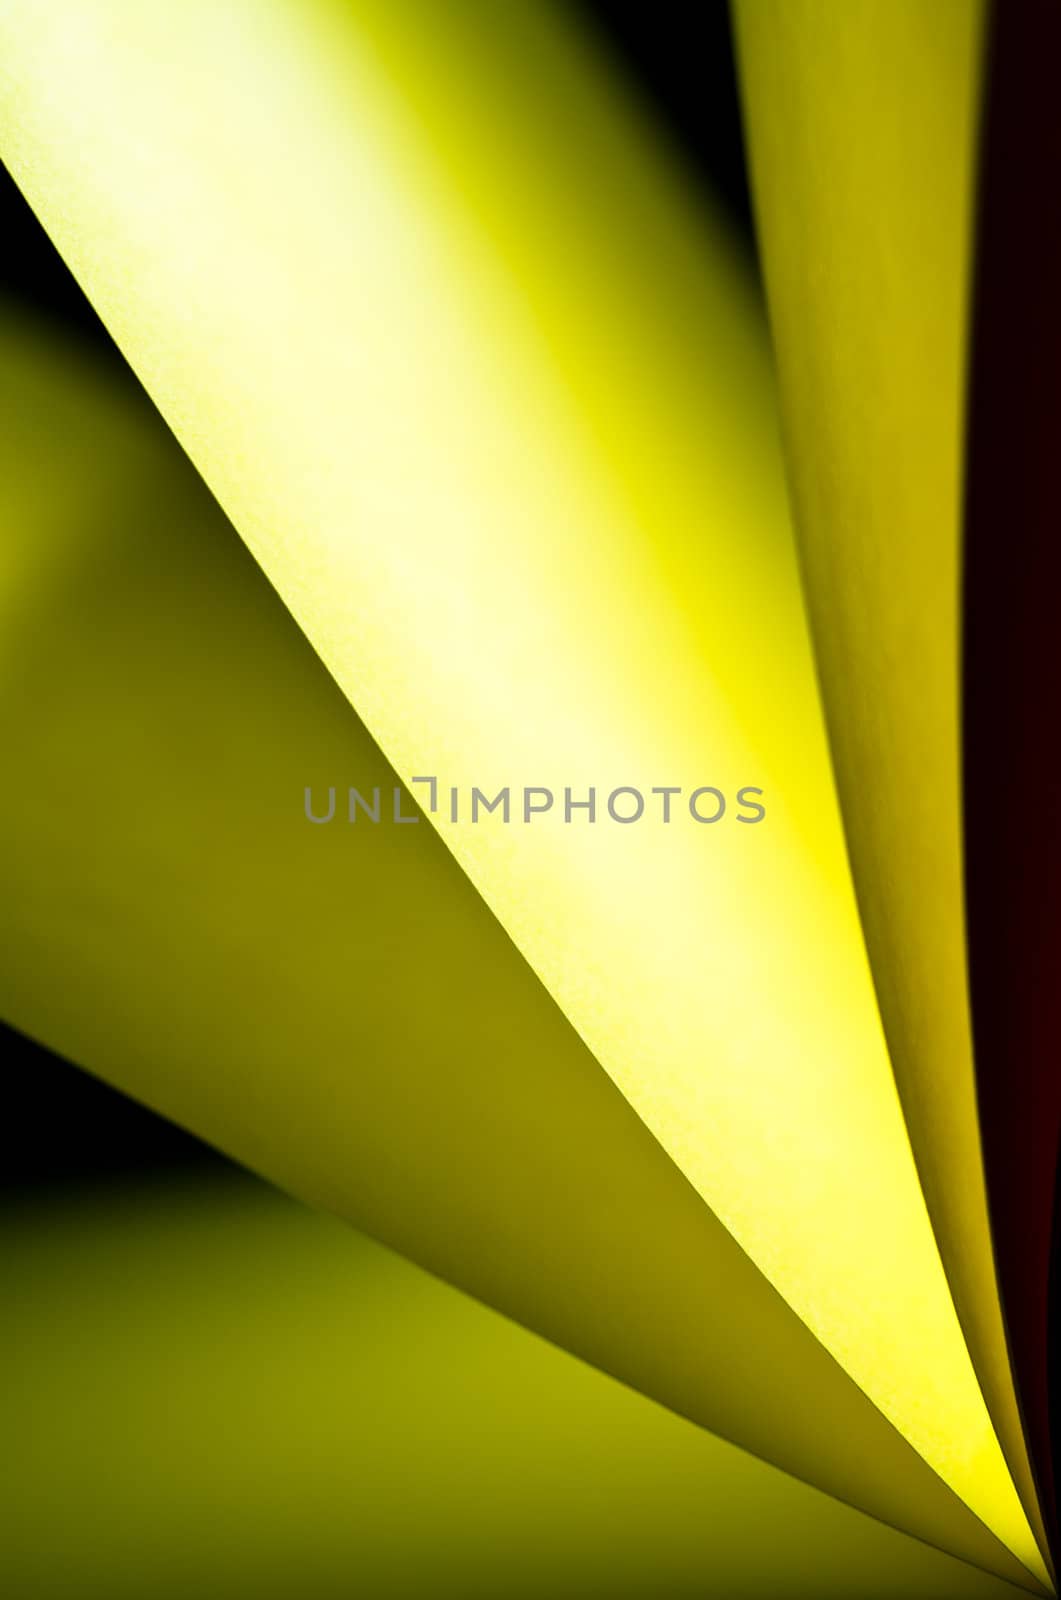 Yellow notepad paper illuminated by LED light with black background in portrait orientation with the paper from lower right angle